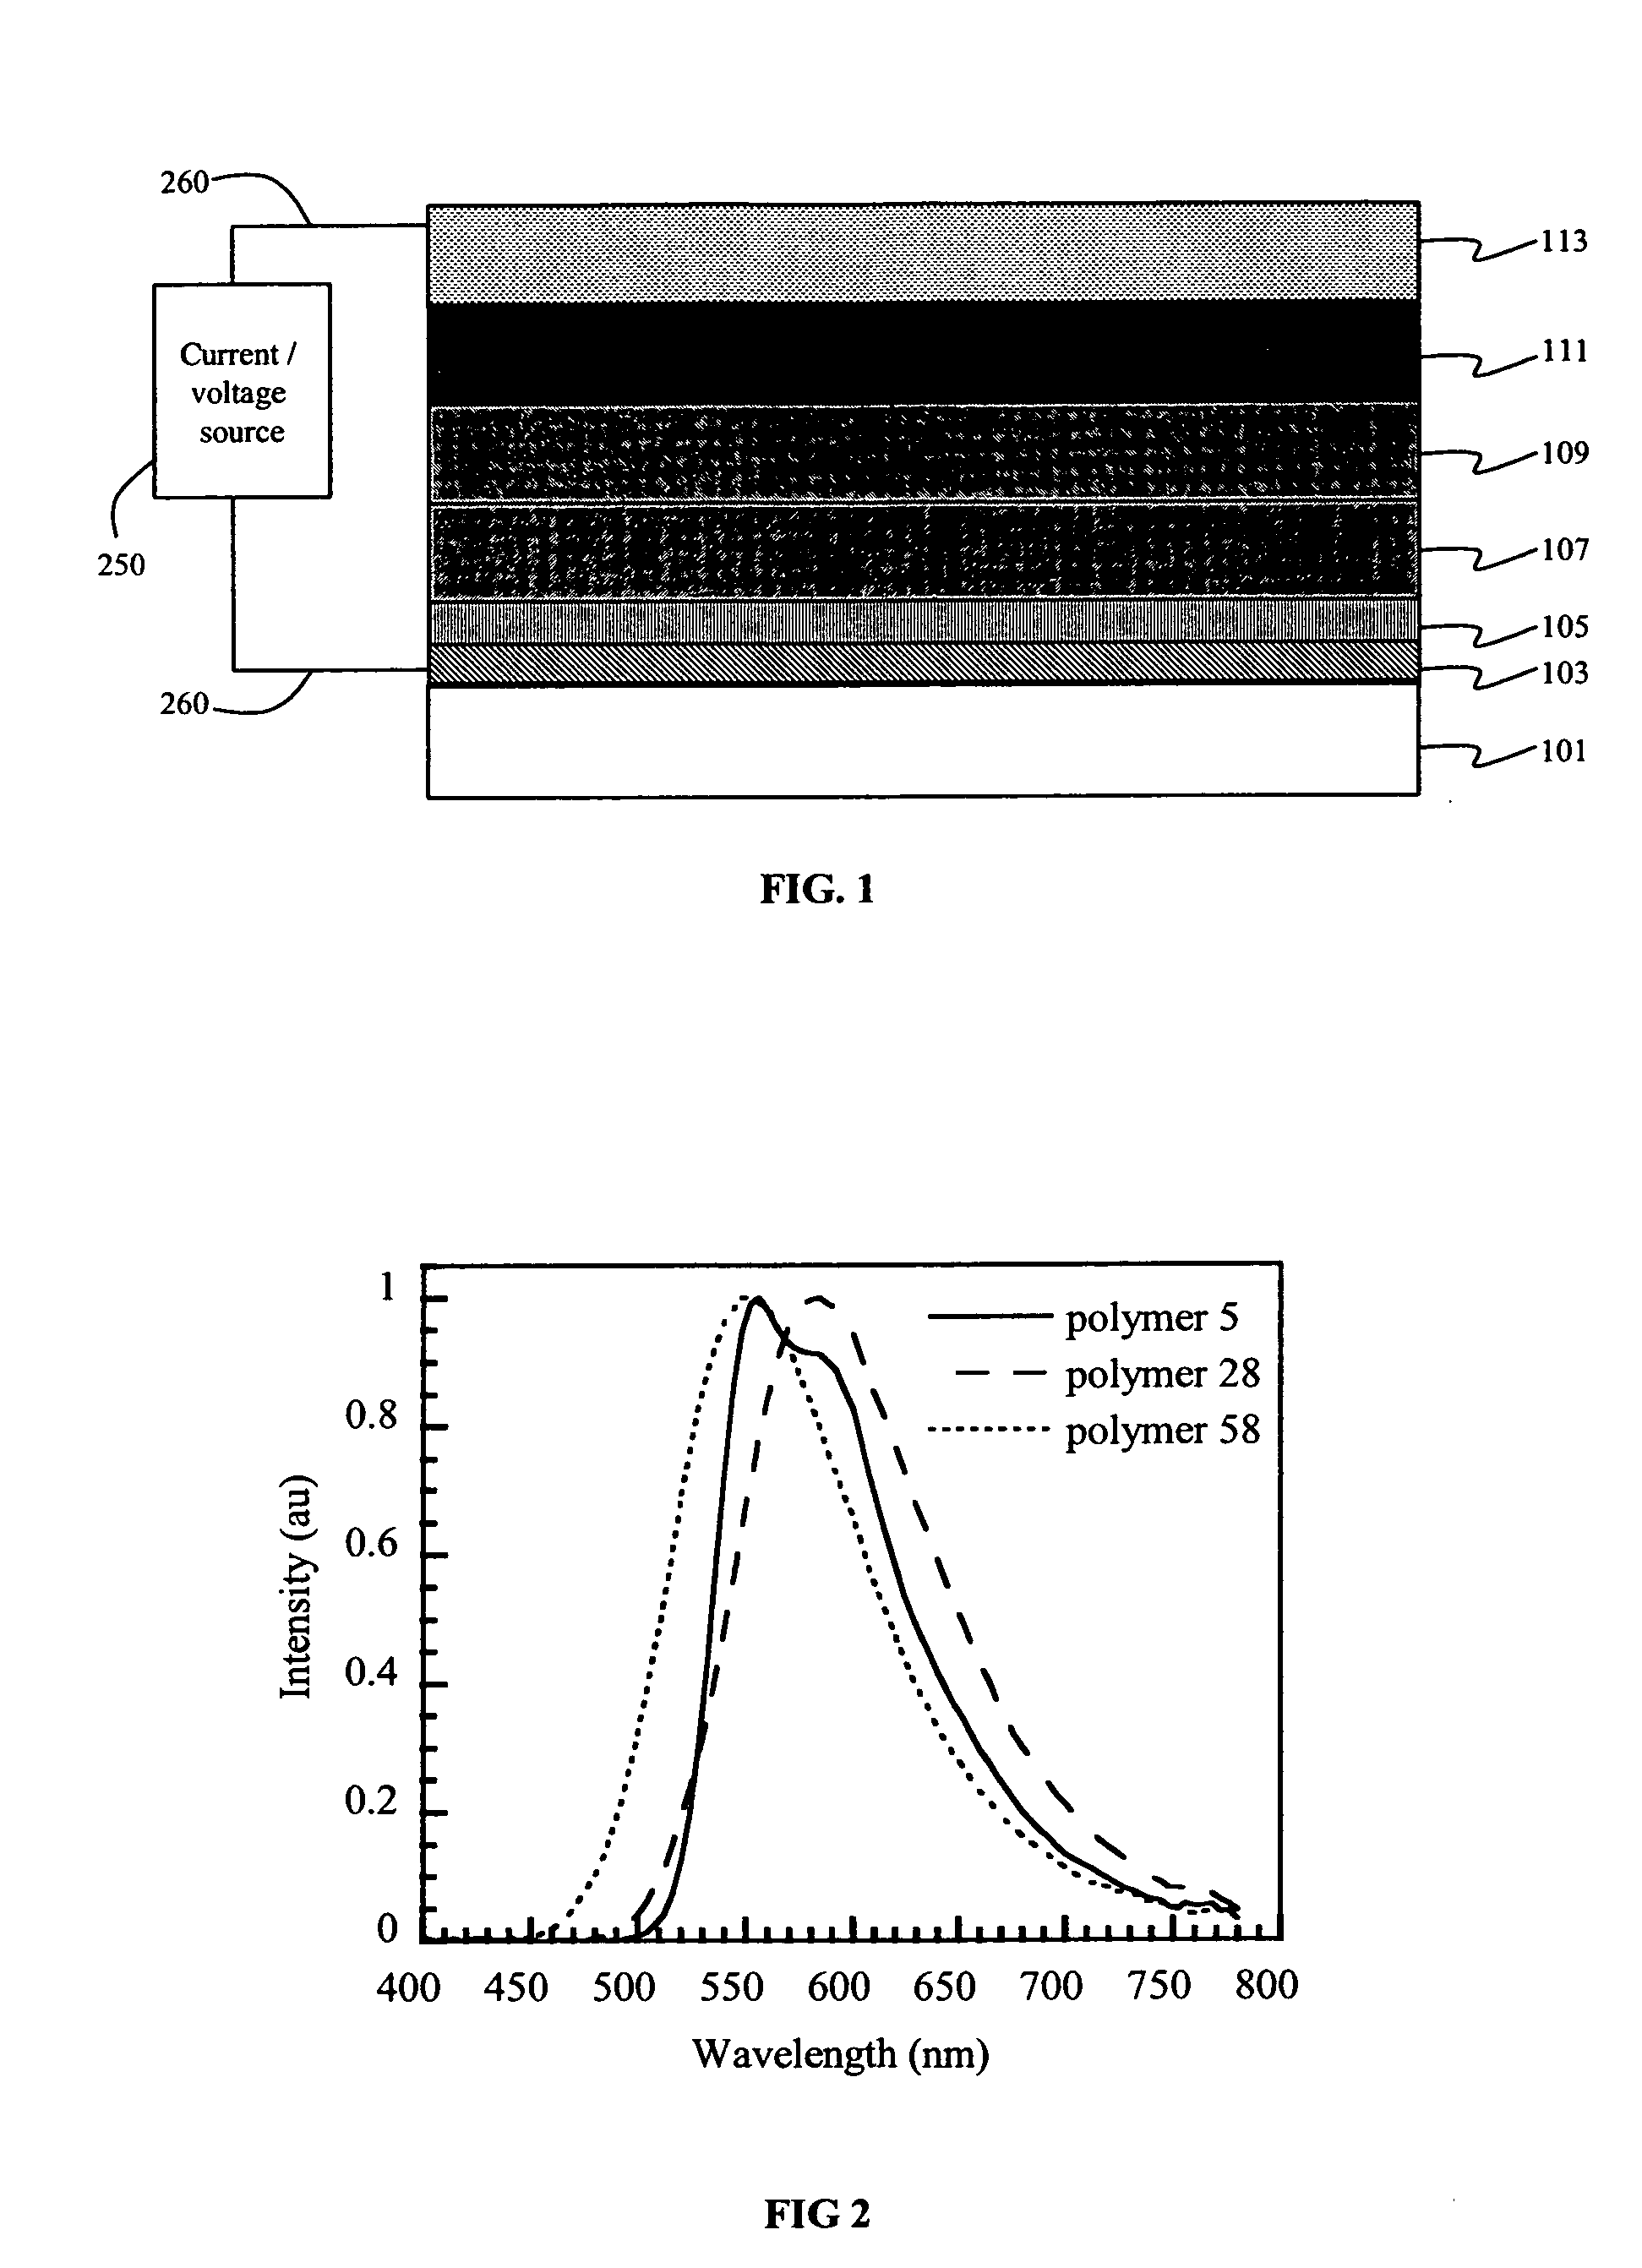 Electroluminescent devices having conjugated arylamine polymers